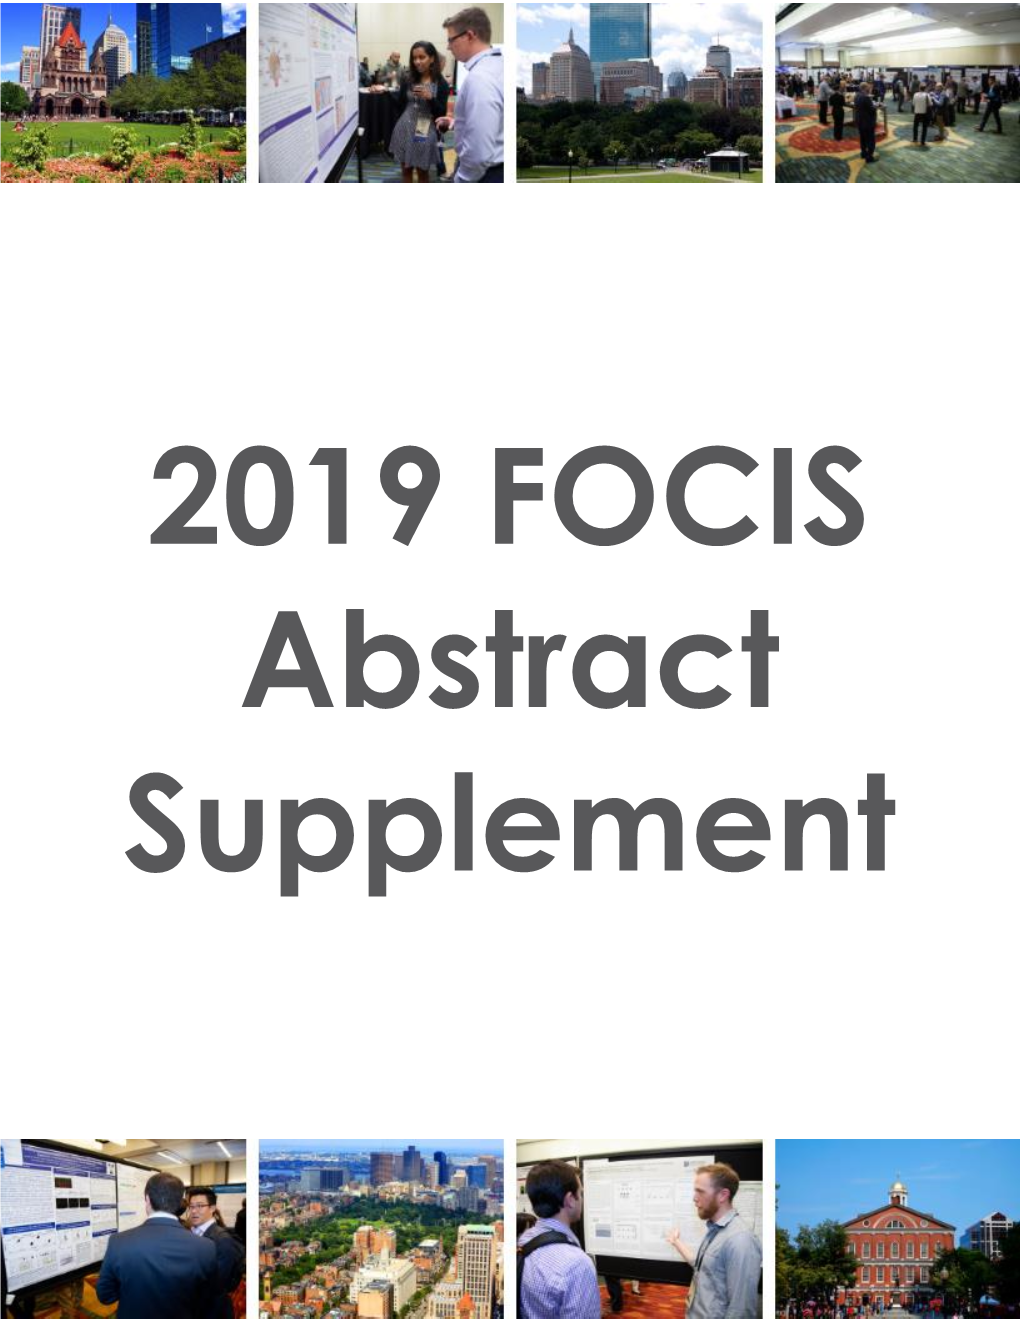 2019 FOCIS Abstract Supplement